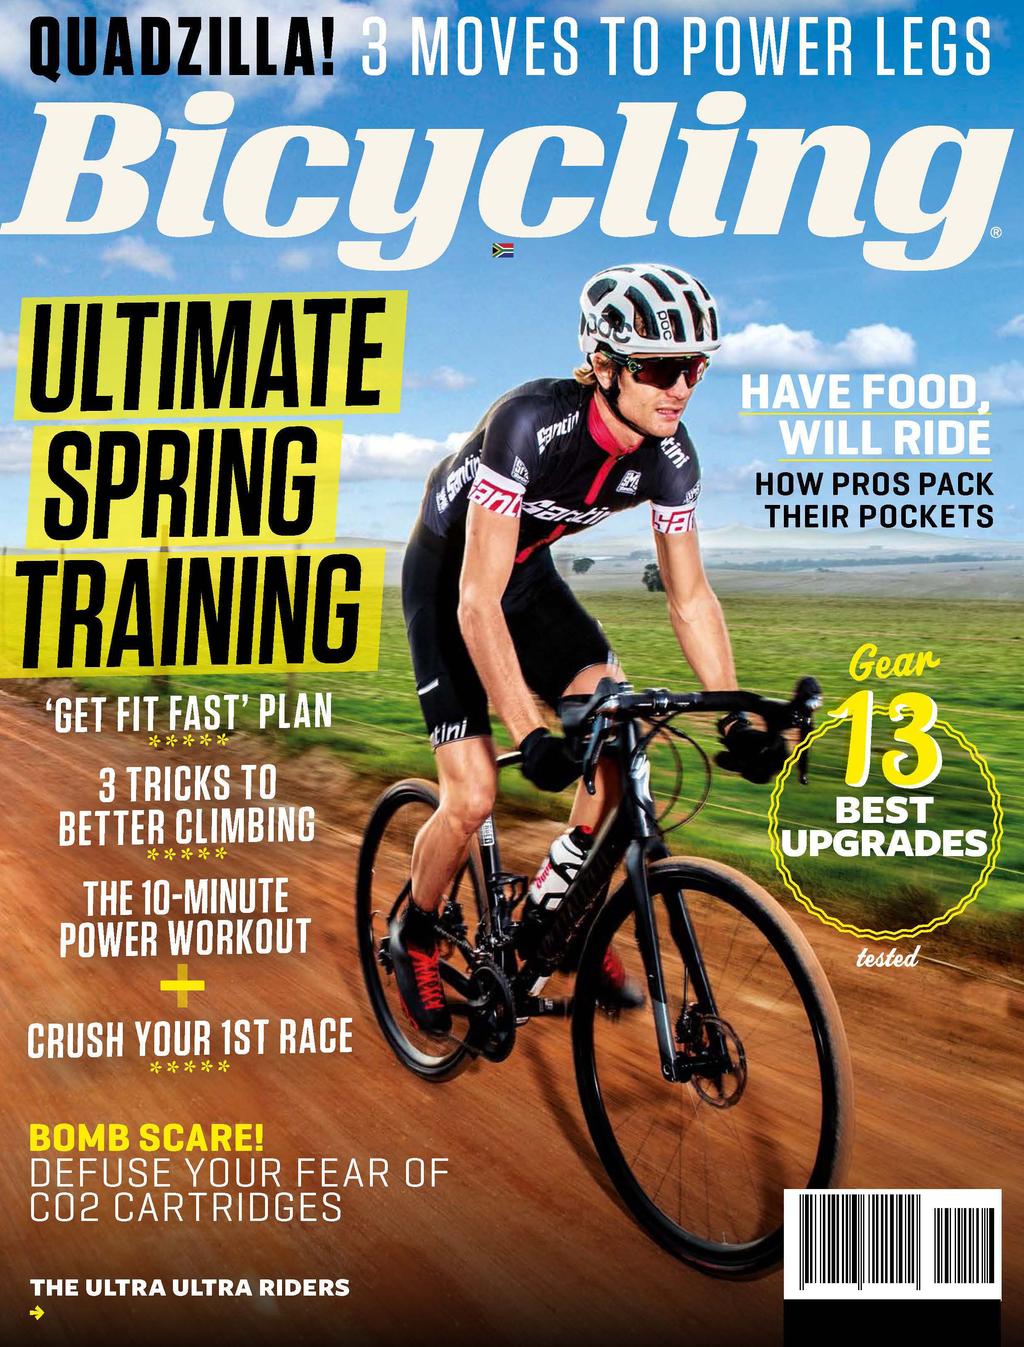 SA S BEST-SELLING CYCLING MAGAZINE WITHOUT BREAKING THE BANK J HYDRATION PACKS PAGE 74 SPECIALIZED DIVERGE PAGE 84 PYGA STAGE PAGE 88 09116 THE STORY OF THOSE WHO